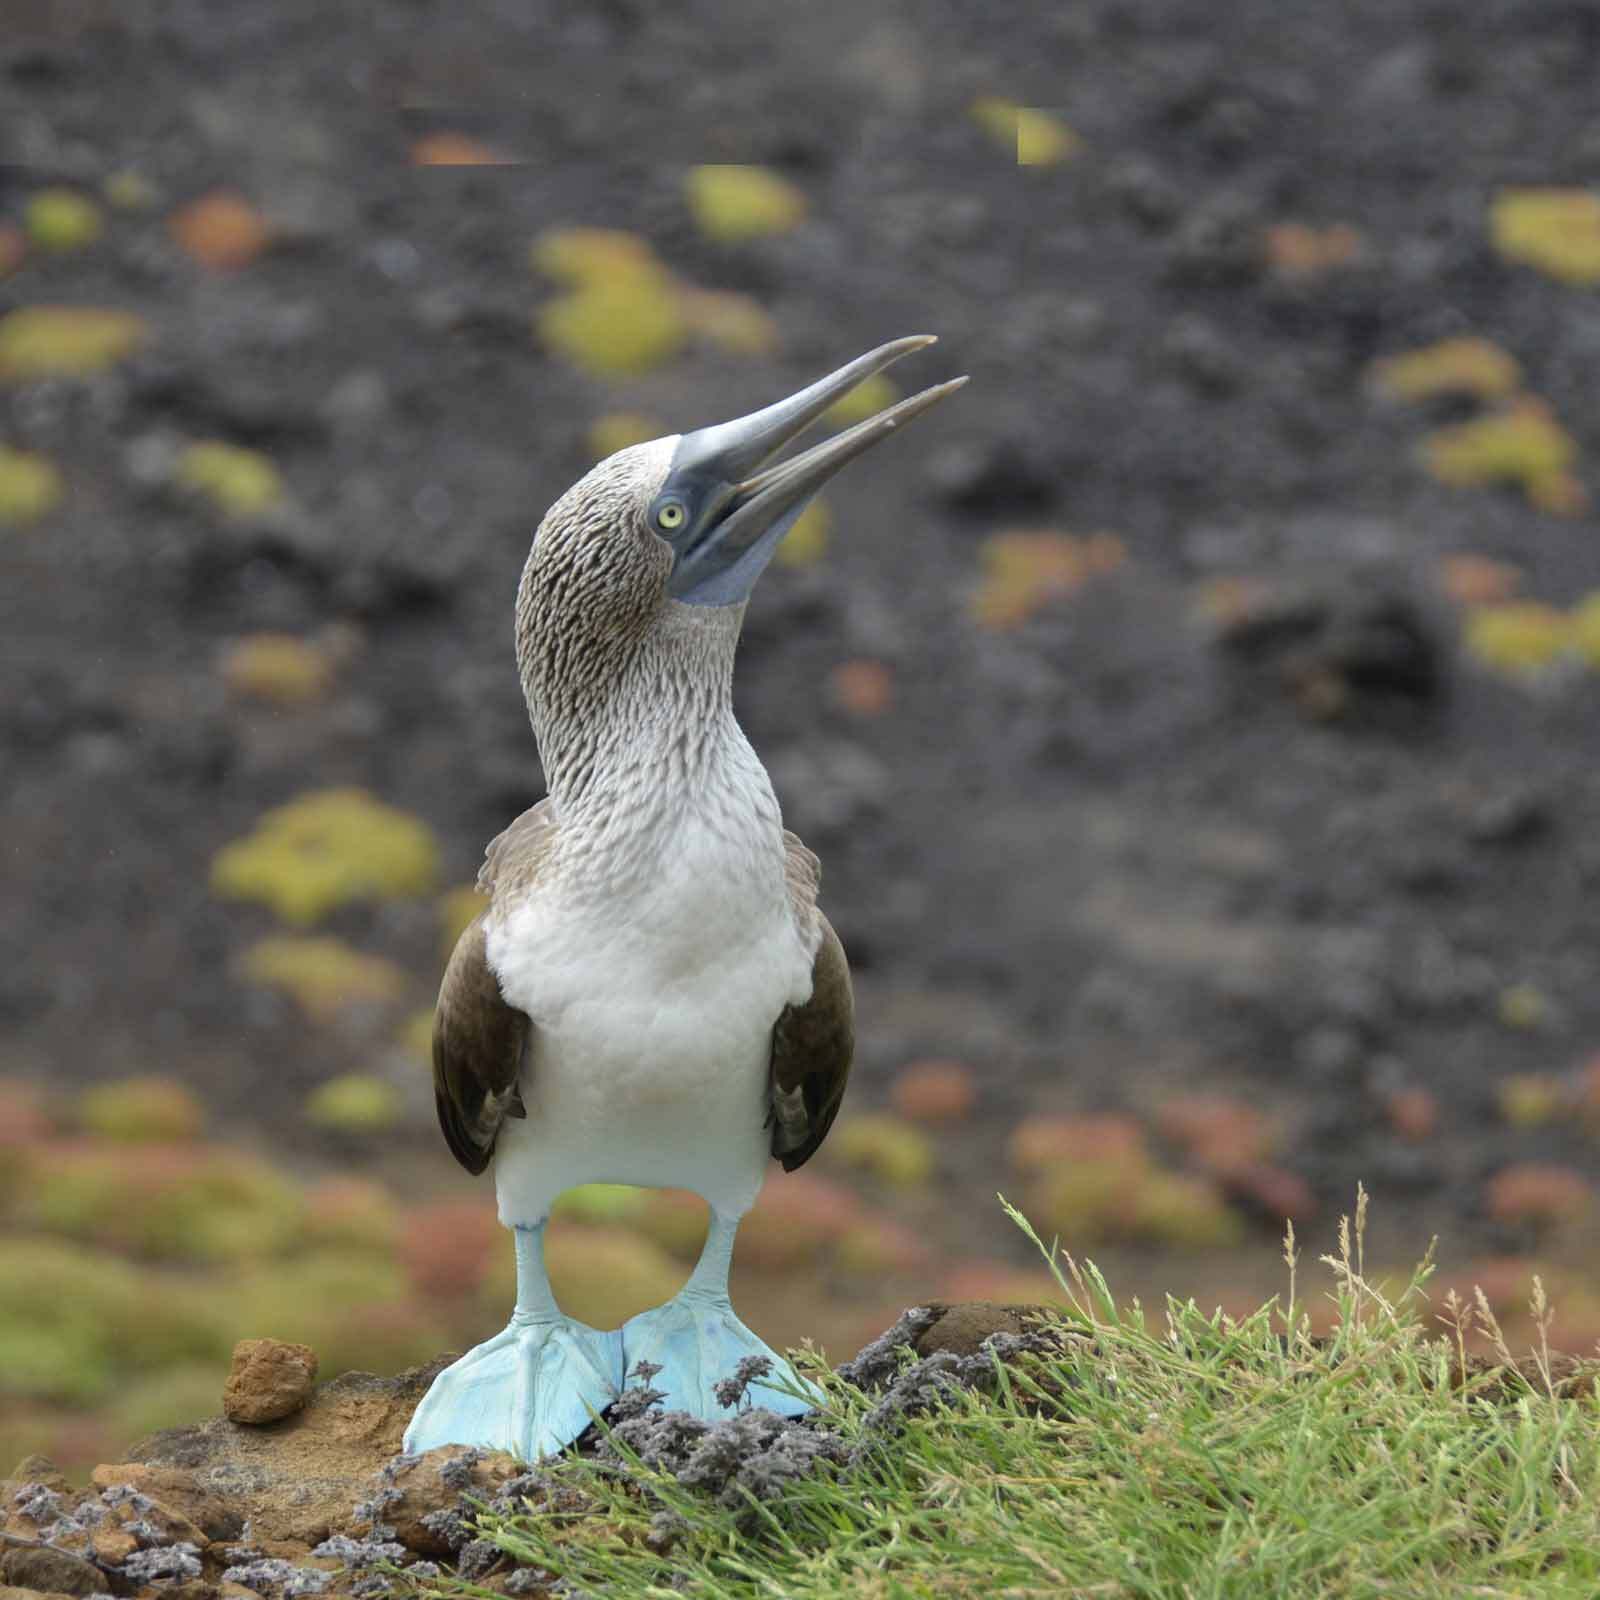 A blue-footed booby, an intriguing bird species with distinctive blue feet, is pictured with its beak wide open. The background is purposely blurred to enhance focus on the beautiful creature in its natural habitat.